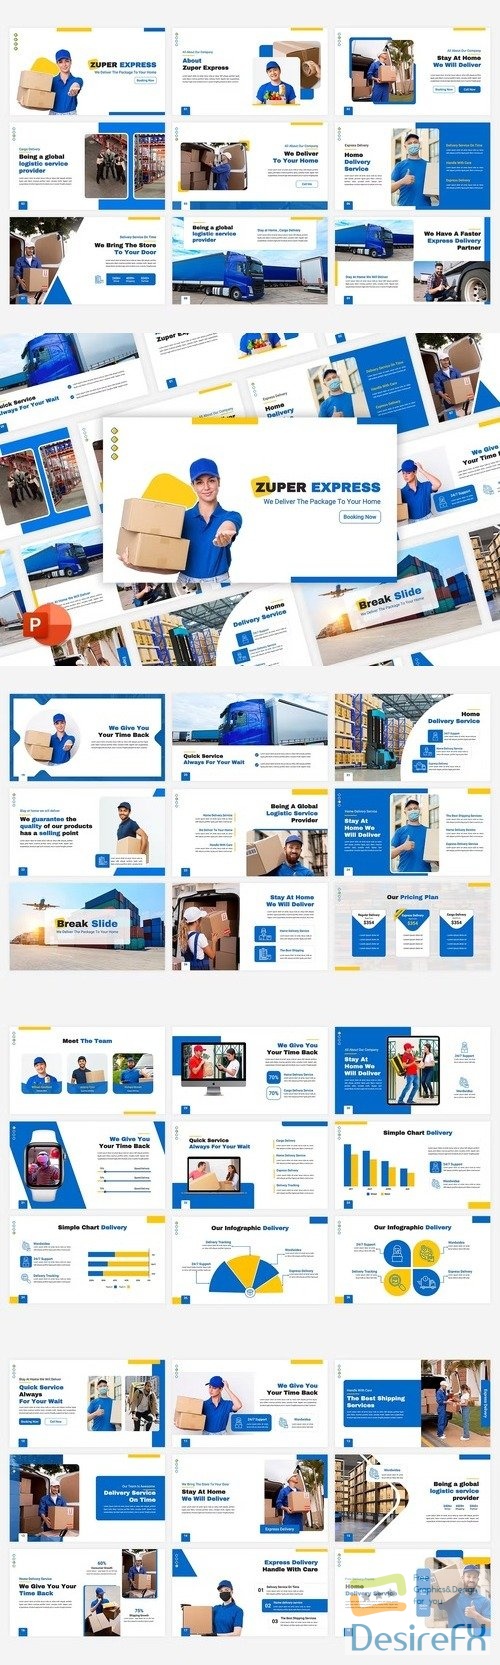 Zuper - Express Delivery Powerpoint, Keynote Template